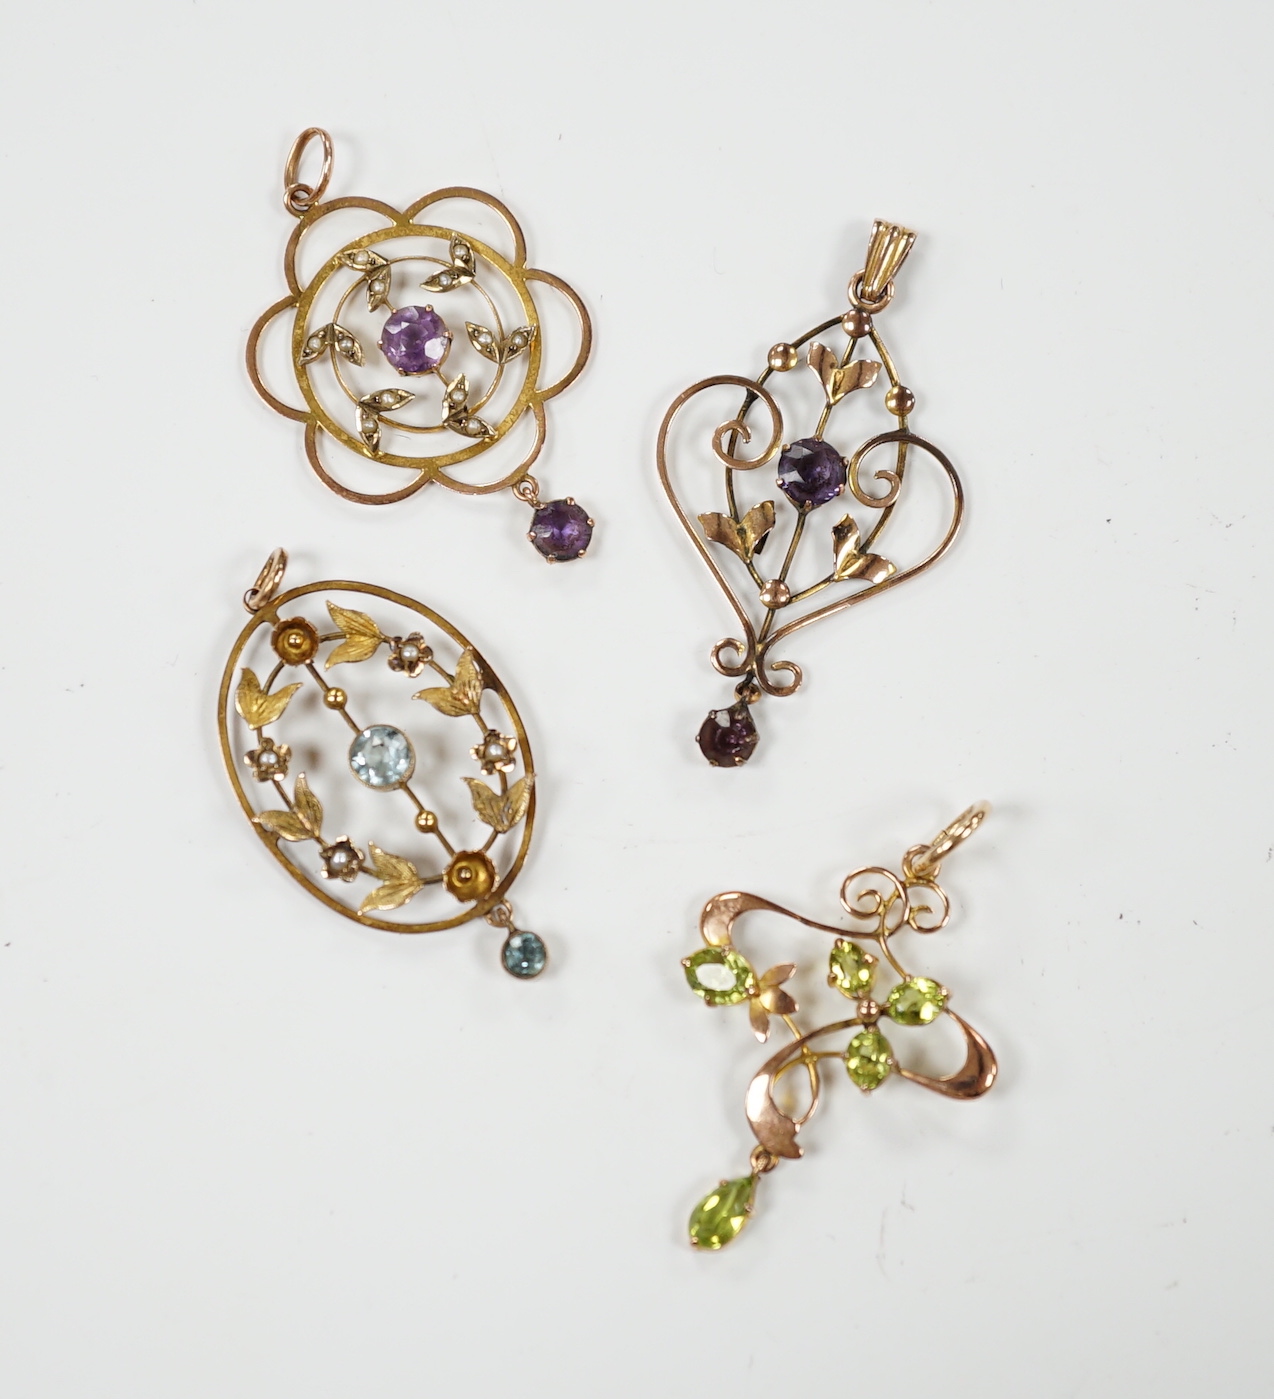 Three assorted early 20th century 9ct and gem set pendants, one other similar yellow metal and gem set pendant, largest, 40mm, gross weight 7.5 grams.